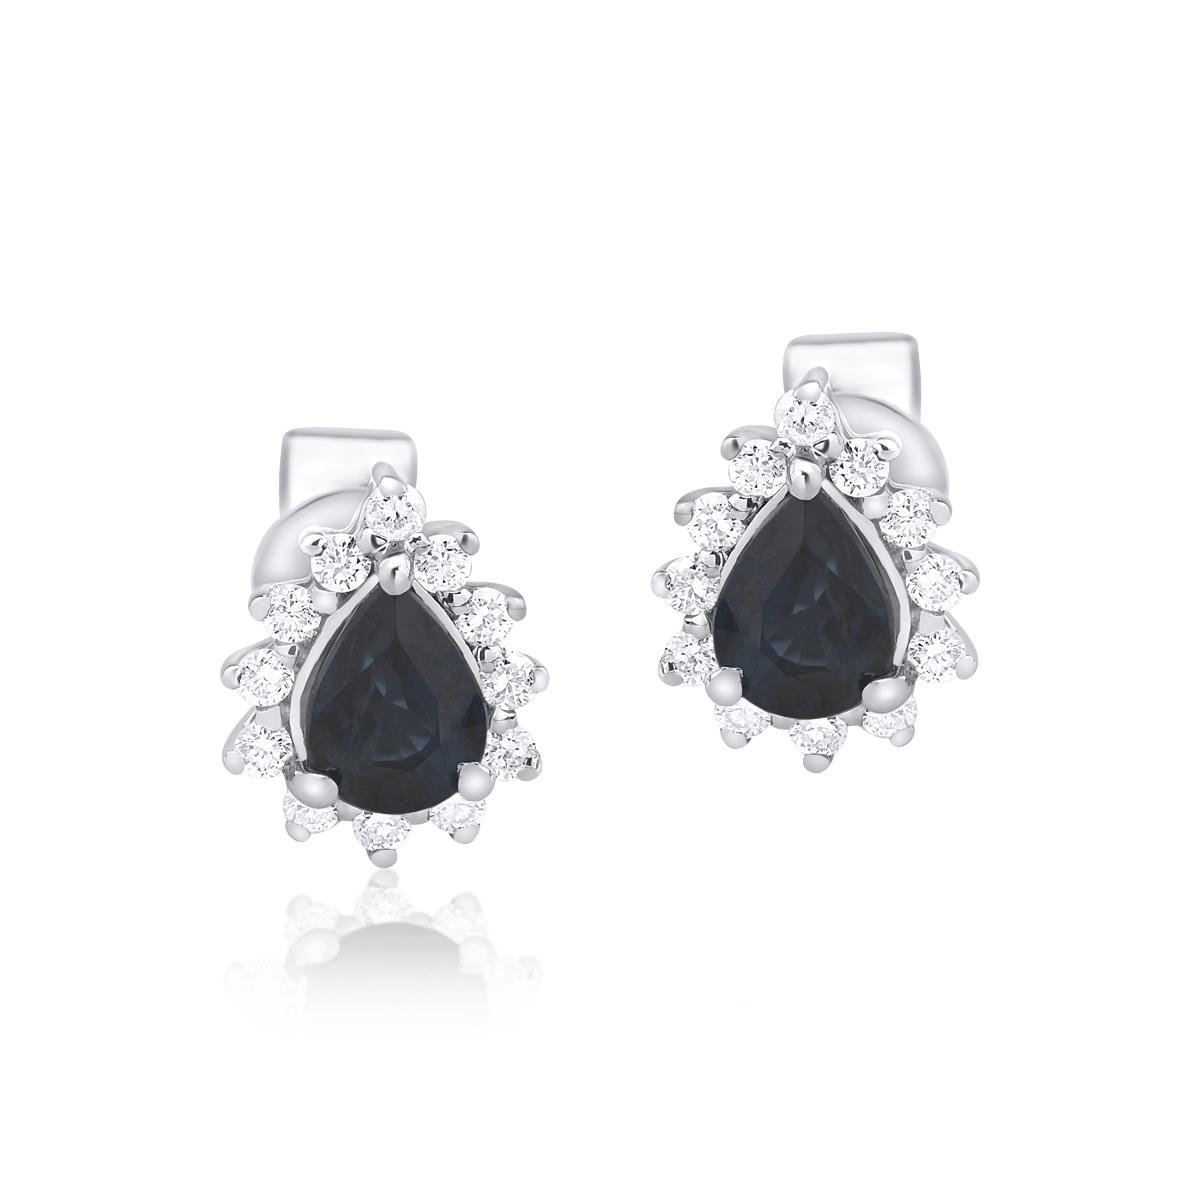 18K white gold earrings with sapphires of 0.573ct and diamonds of 0.159ct